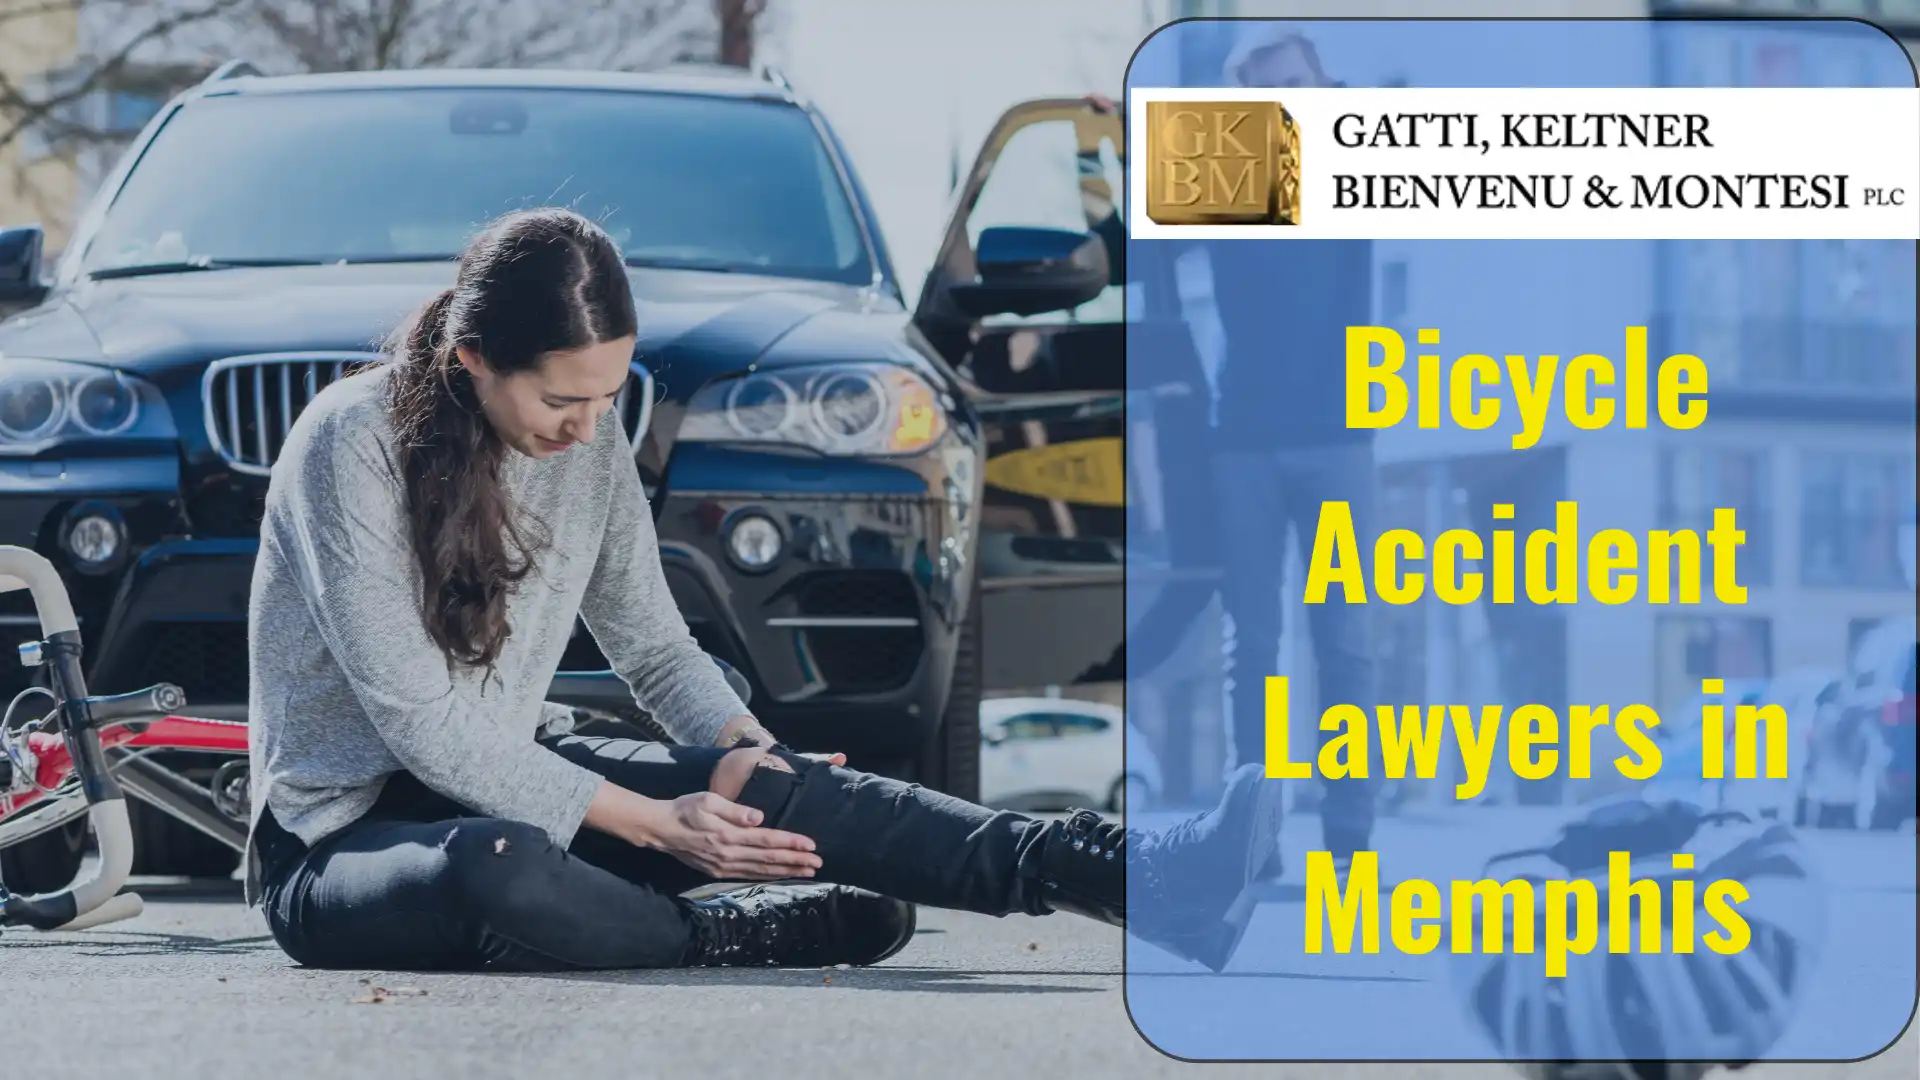 Bicycle Accident Lawyers in Memphis